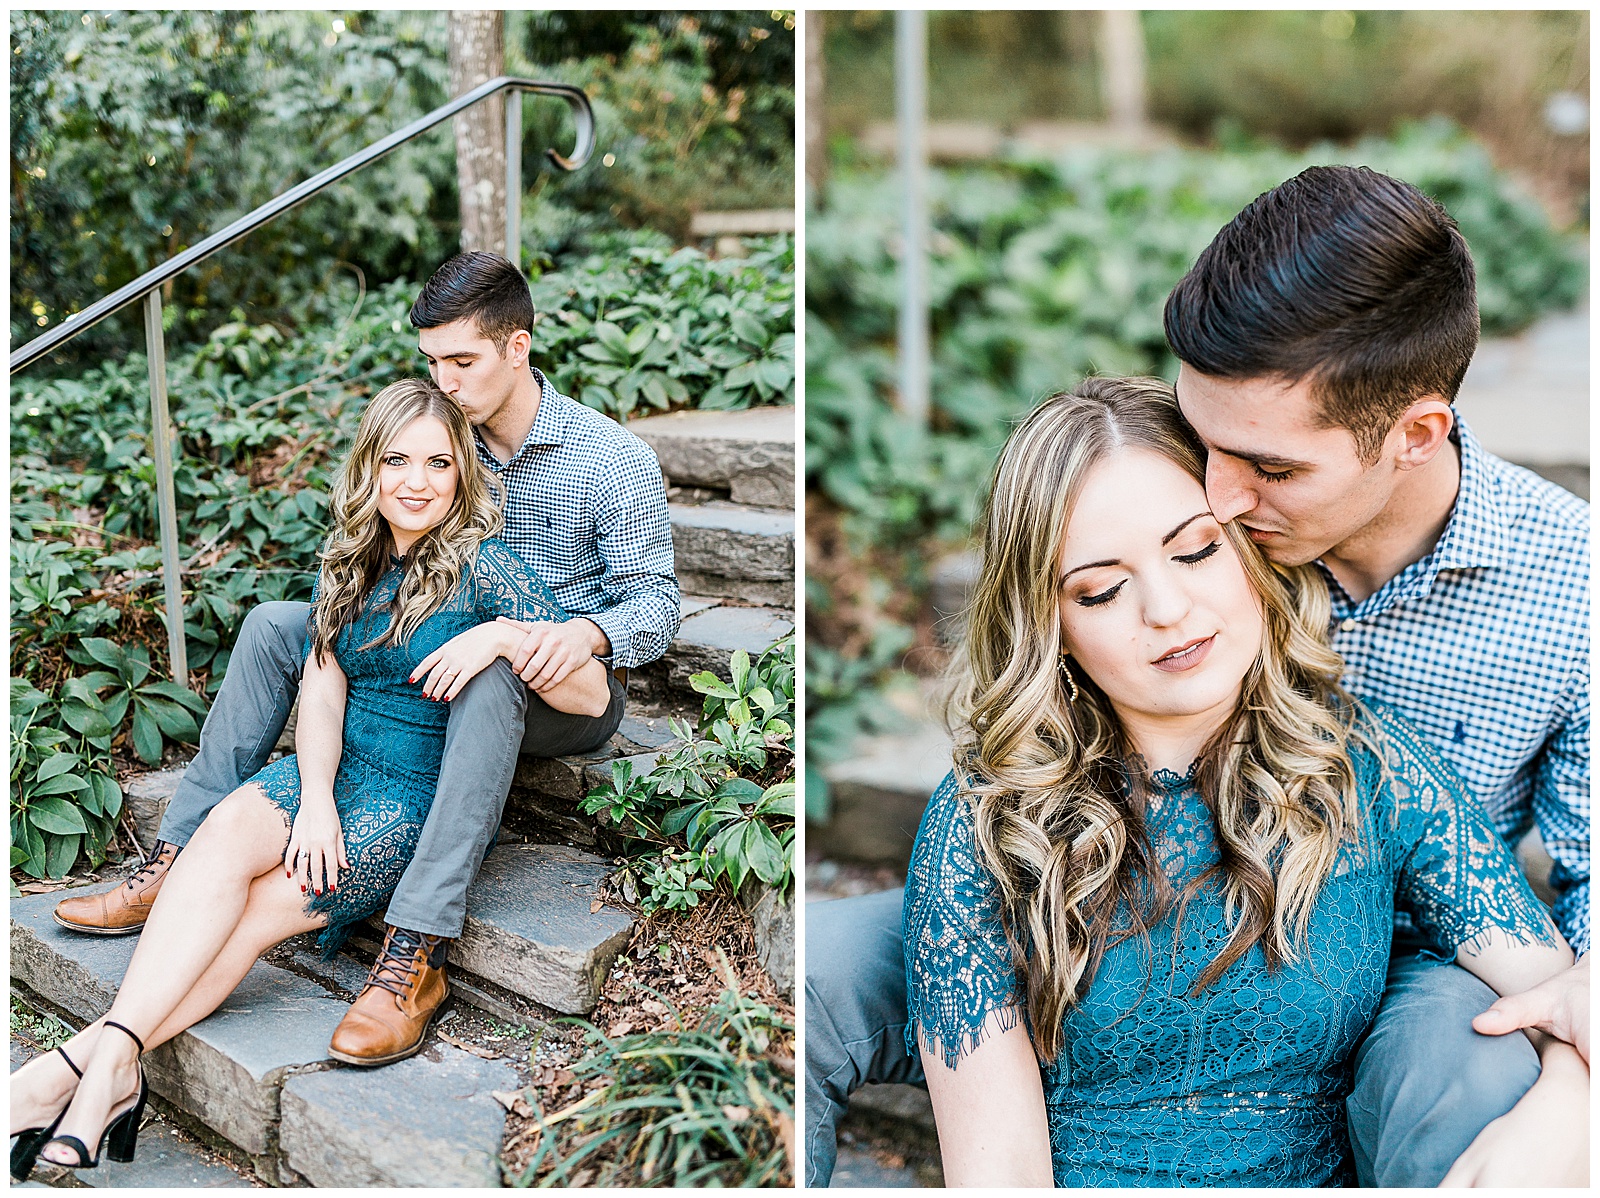 Blue Lace Dress Blue Button Up Golden Hour Outdoor Fall Engagement Session with Whitney and Logan by Kevyn Dixon Photography